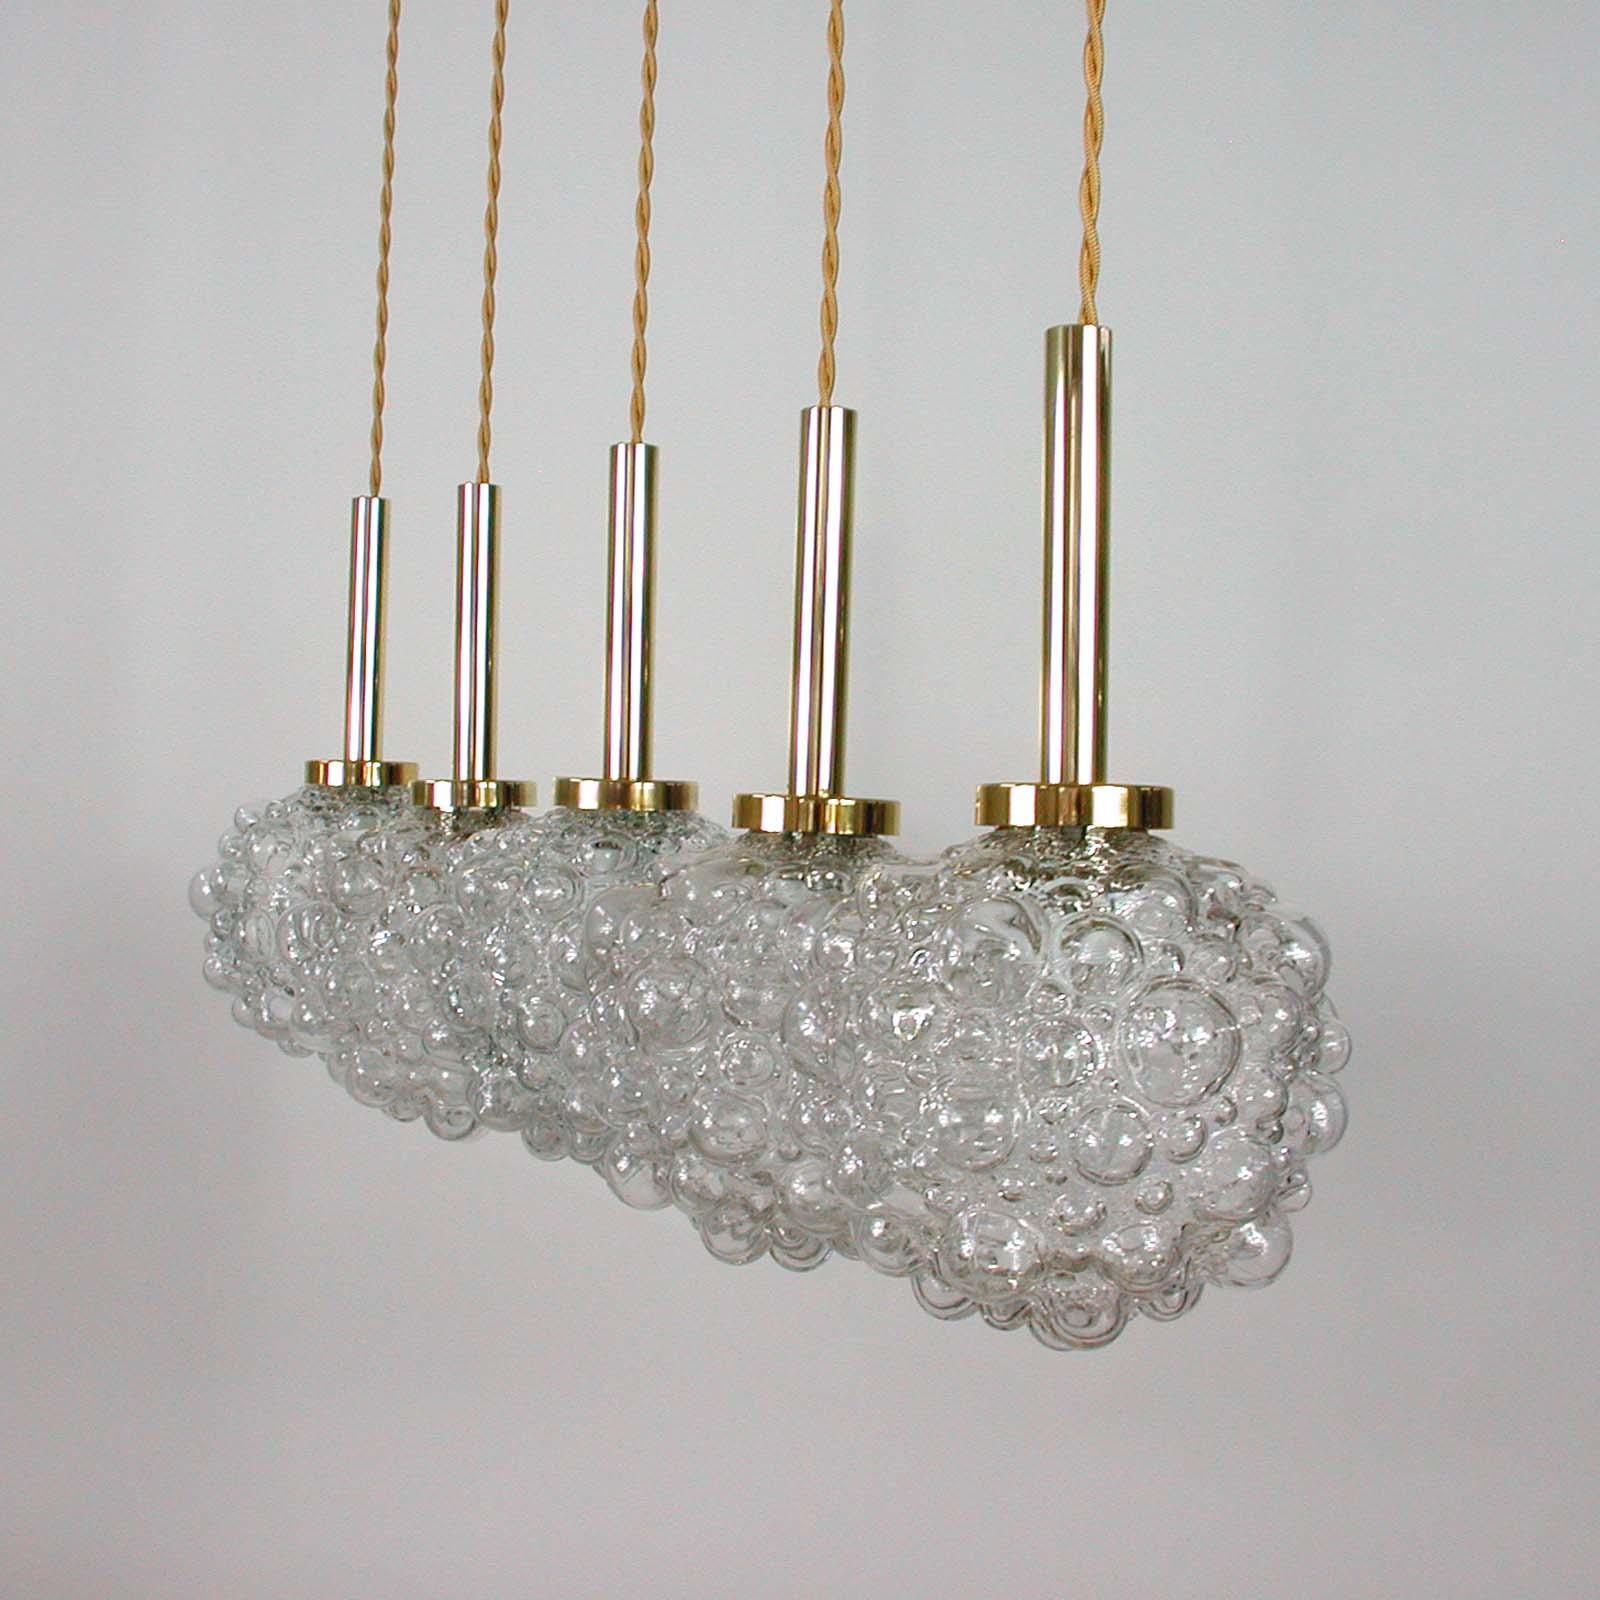 Mid-20th Century Midcentury German Clear Bubble and Brass Pendant, 1960s For Sale